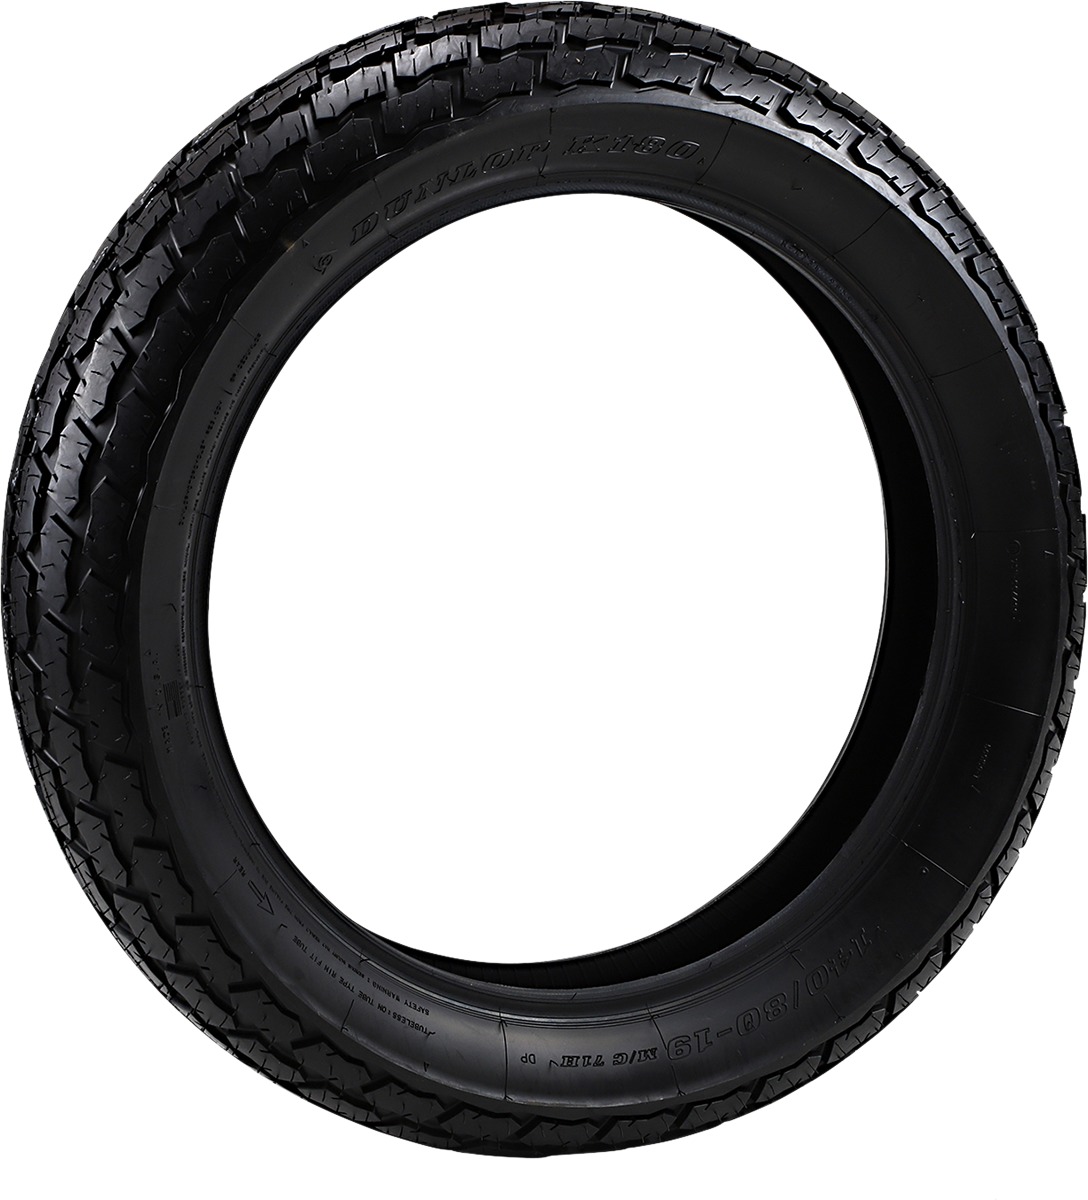 K180 Bias Front Tire 130/80-19 Tube Type - Click Image to Close